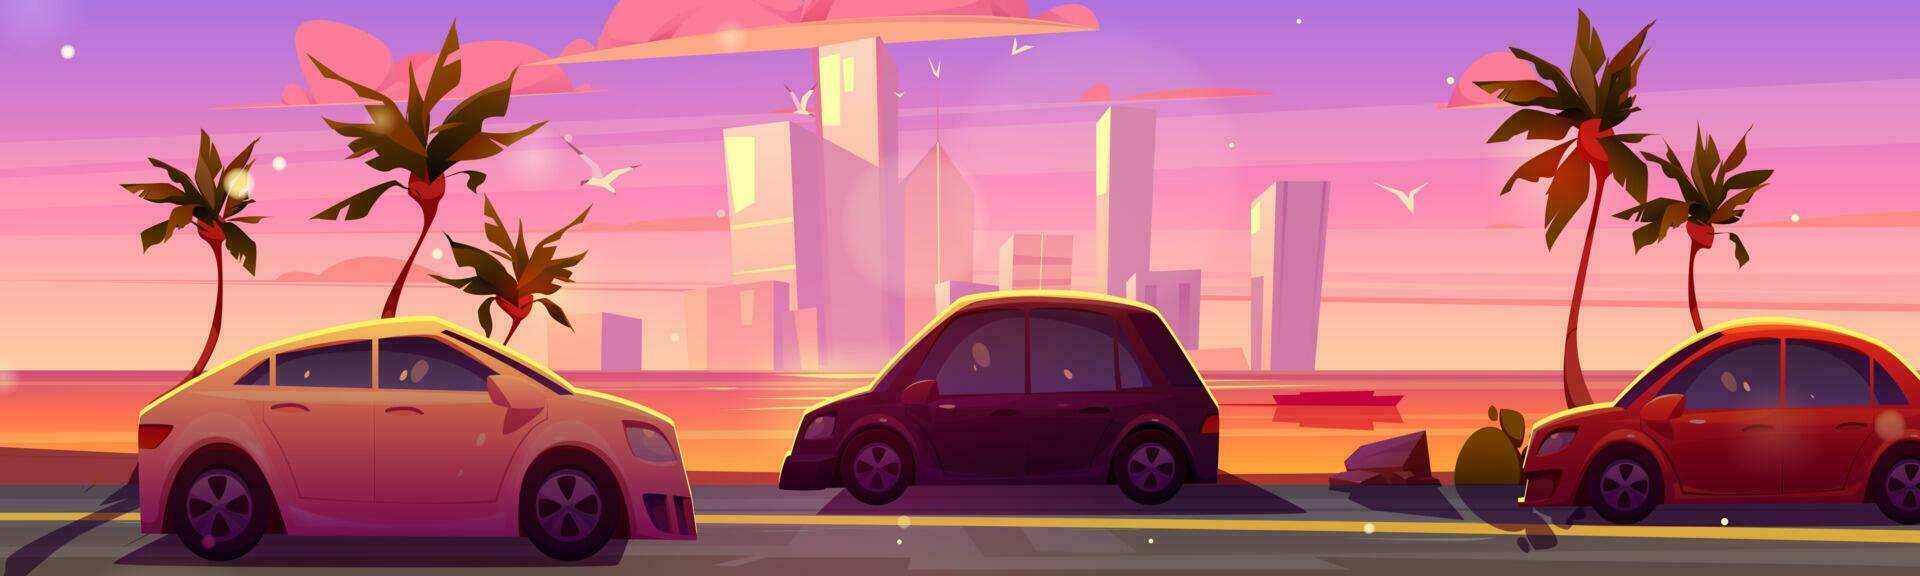 Car drive on sea road, skyscrapper sunset view vector